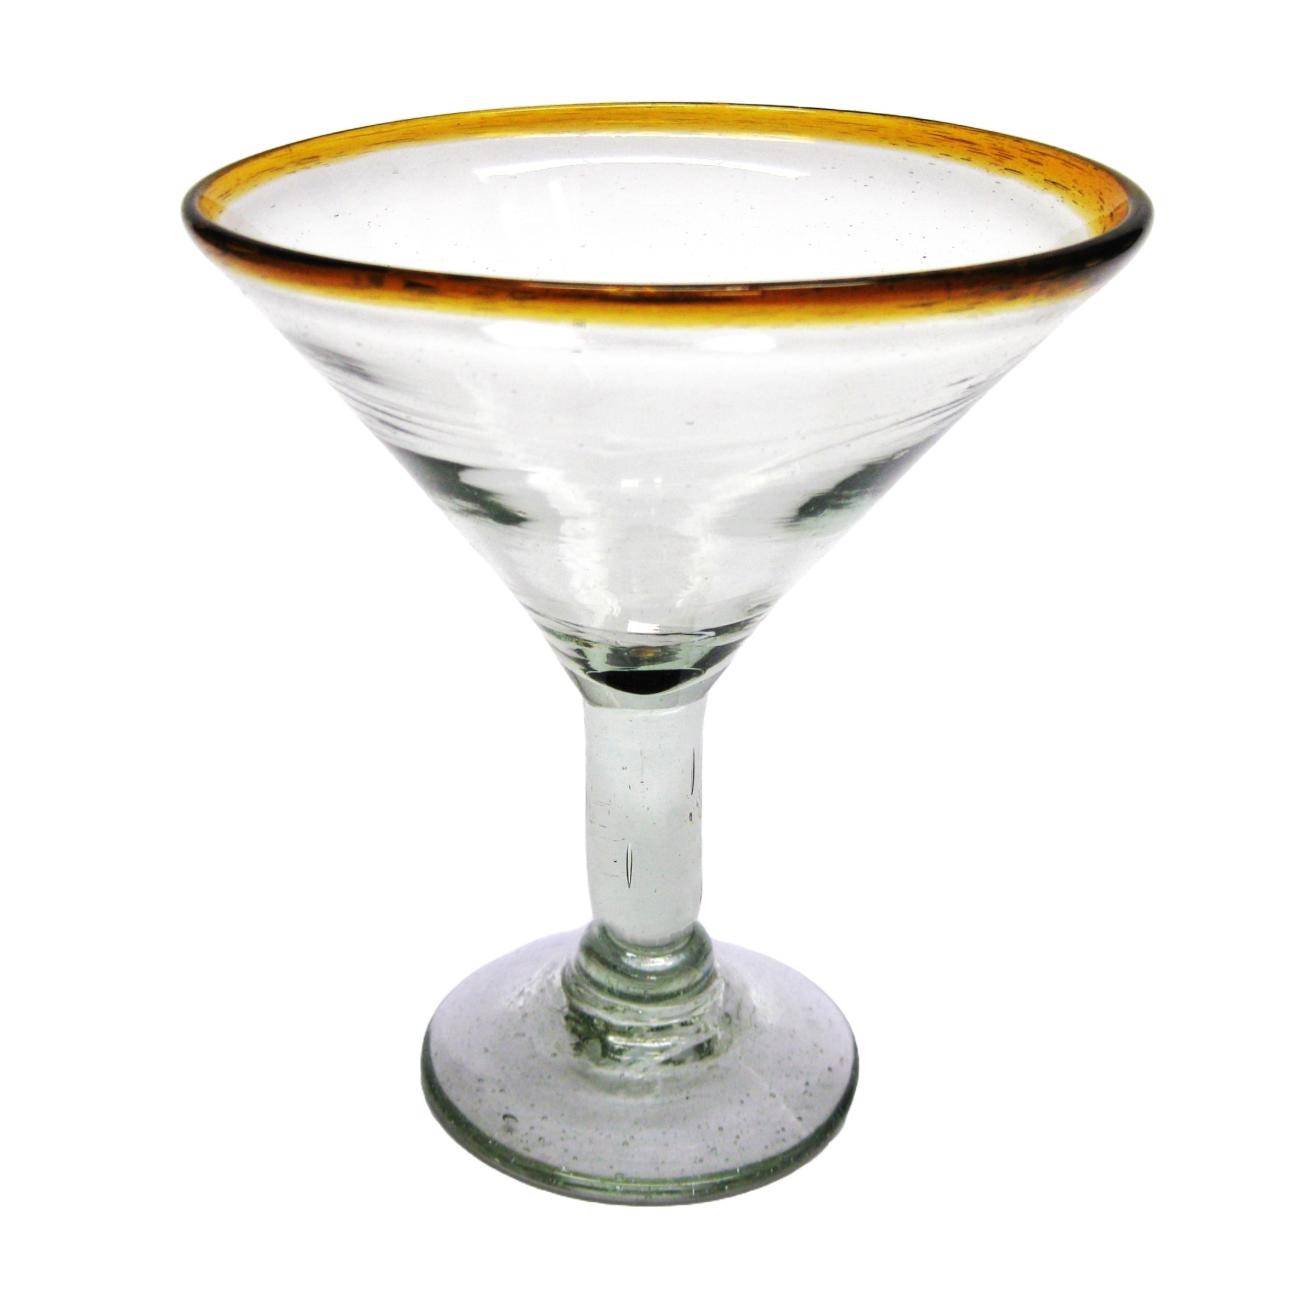 Mexican Margarita Glasses / Amber Rim 10 oz Martini Glasses (set of 6) / This wonderful set of martini glasses will bring a classic, mexican touch to your parties.